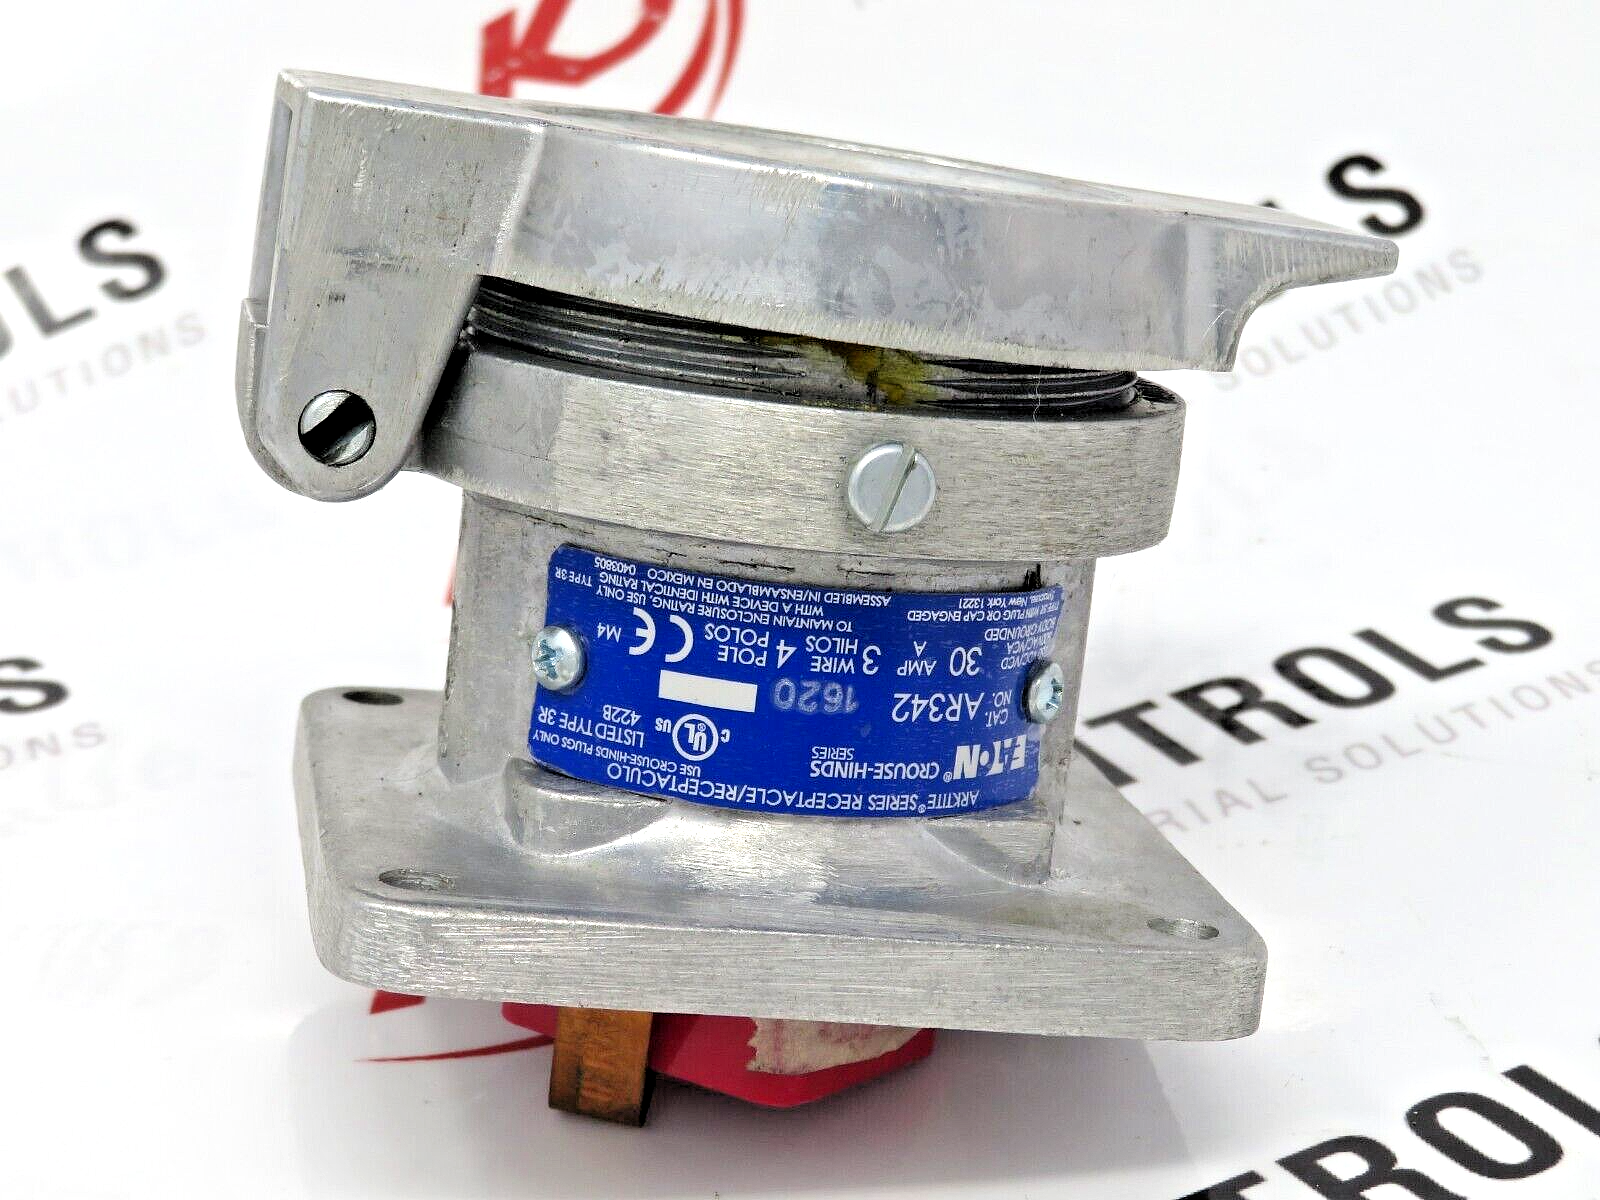 Eaton Crouse-Hinds AR342 M4 Receptacle Body Grounded Type 3R / Rainproof 4-Pole